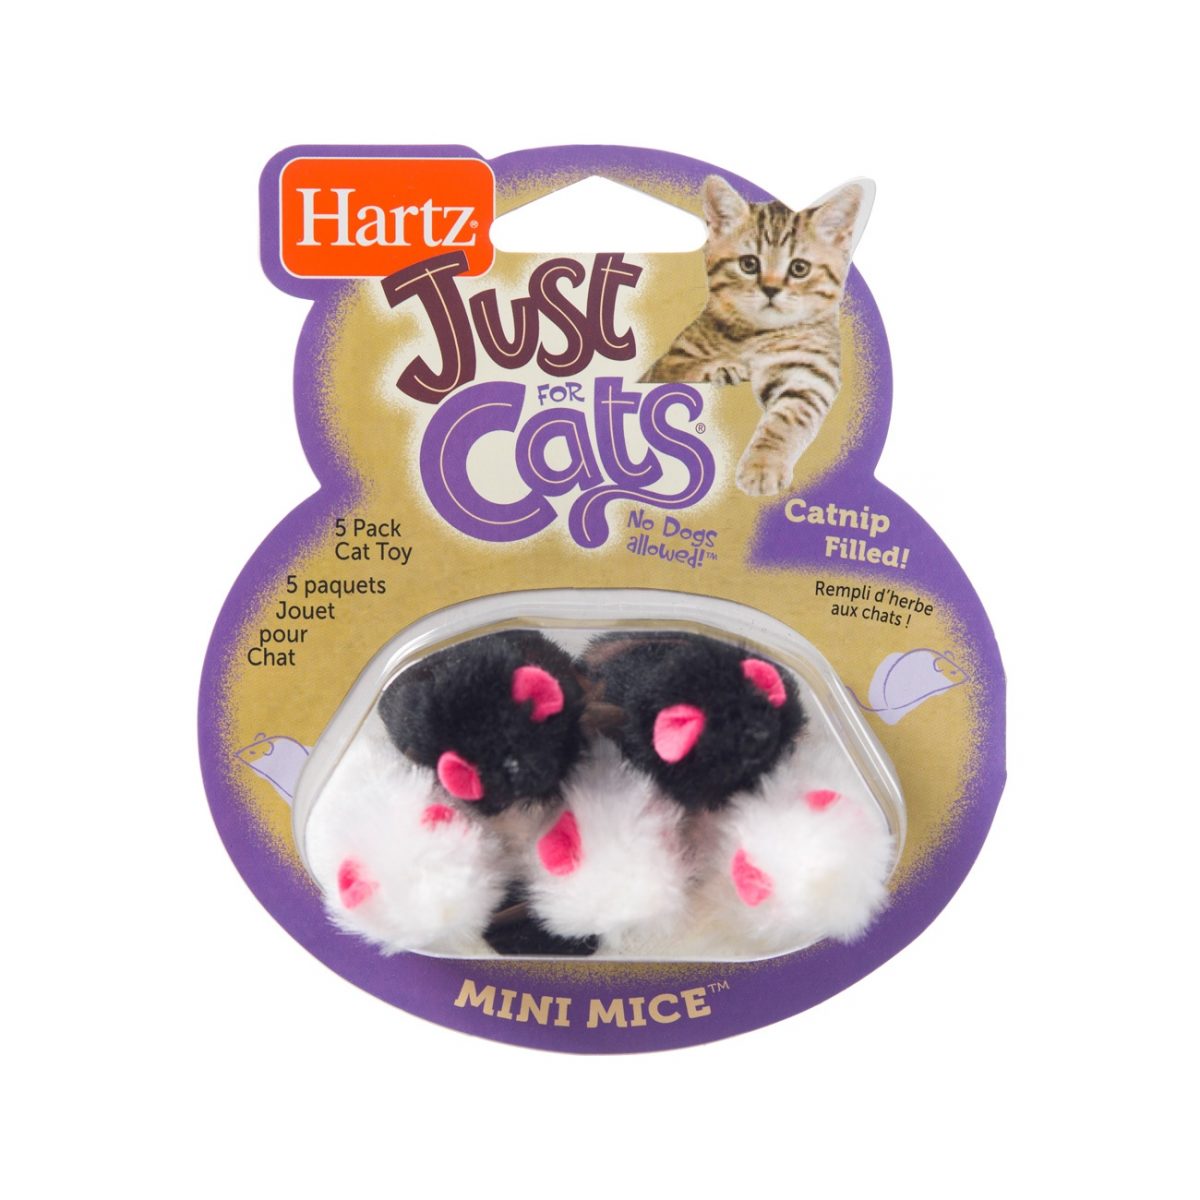 3270095986 hartz just for cats 5 pack mini mice cat toy front 1300x1300